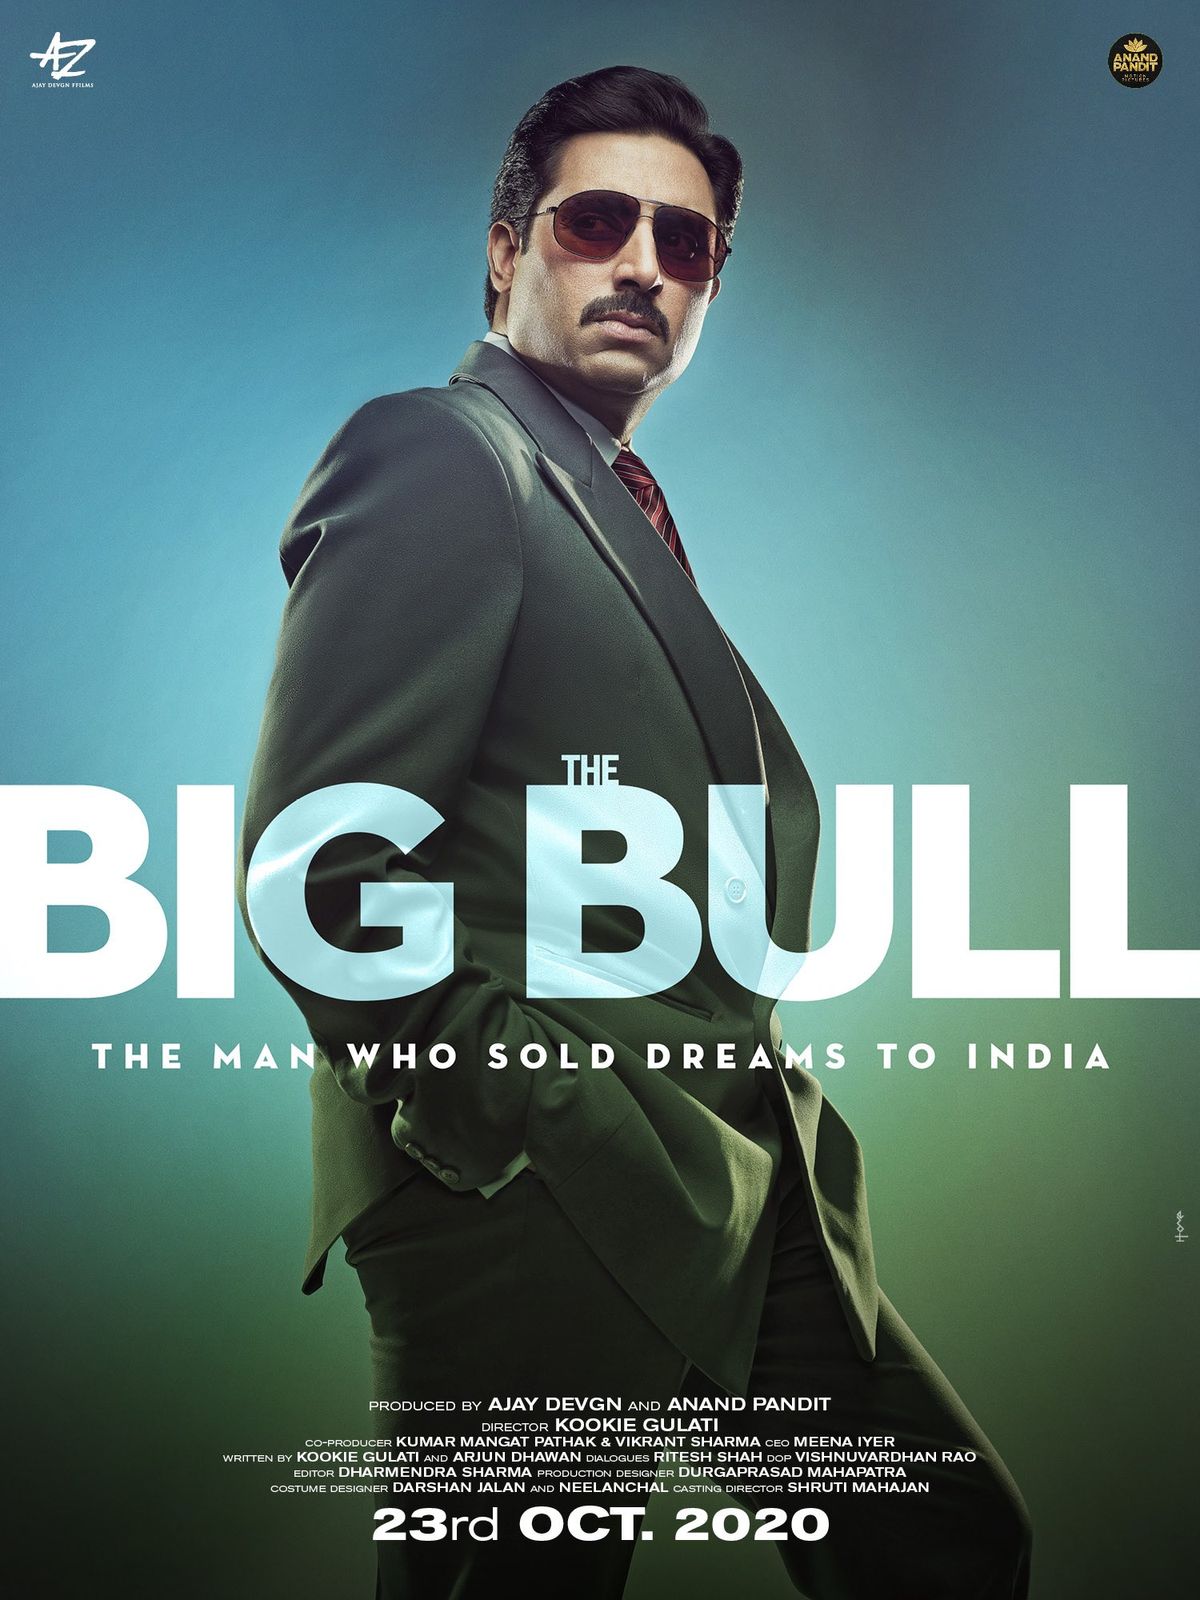 Abhishek Bachchan And Ajay Devgn In Agreement To Release The Big Bull On OTT Due To Uncertain Fate Of Cinemas